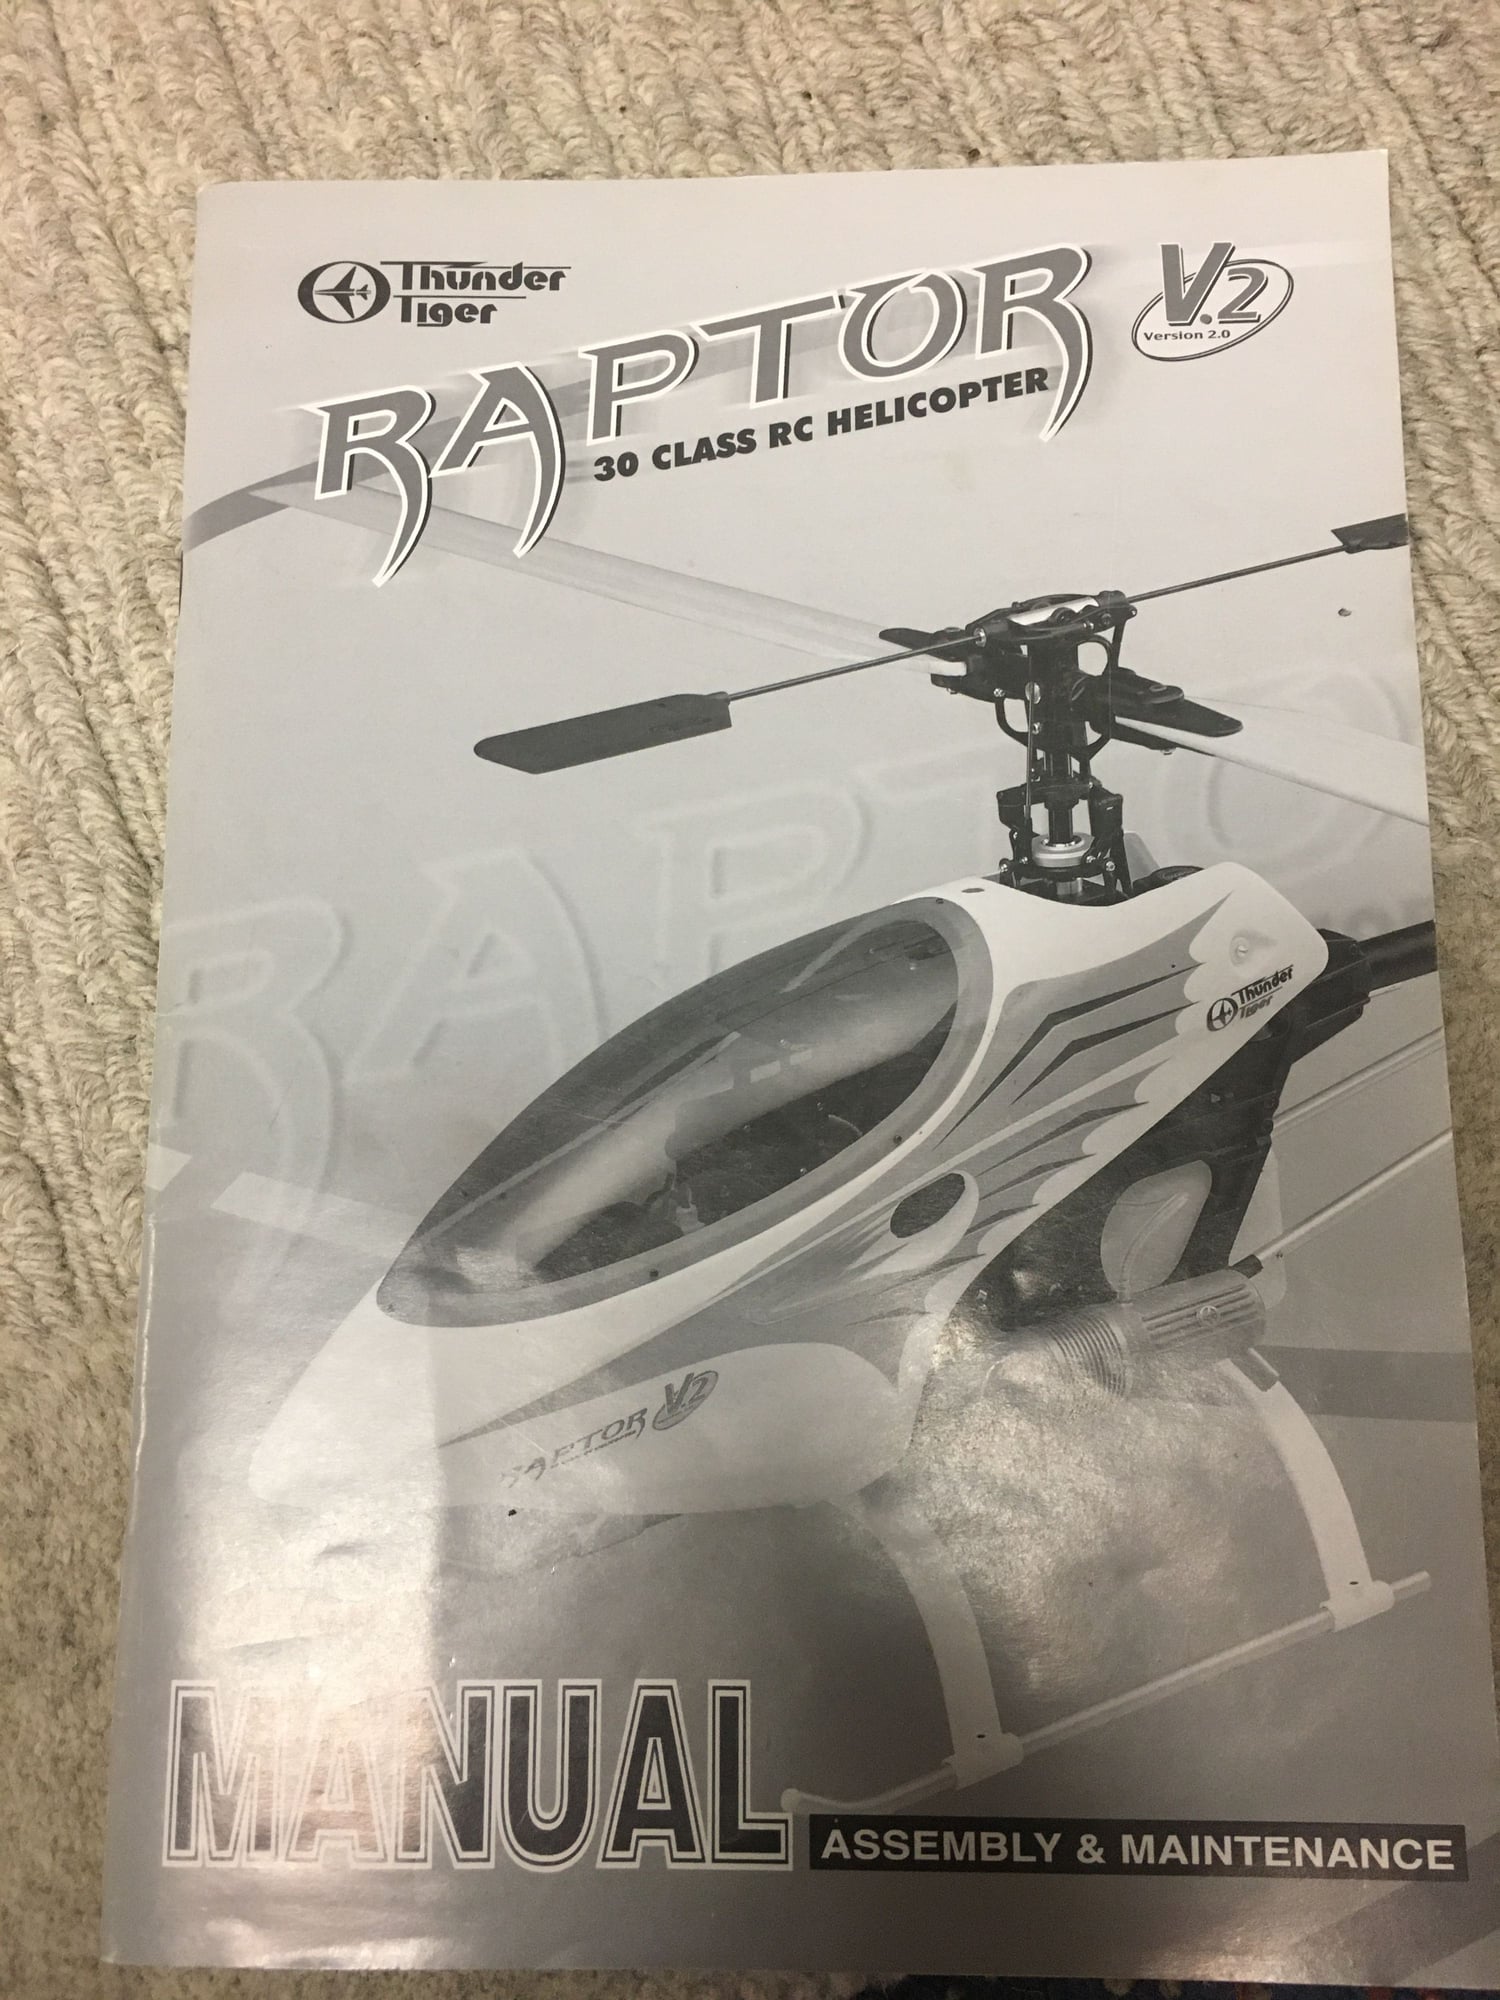 New In Package Flybar For Raptor 30/50 Same As PV0055 RC Helicopter 2 